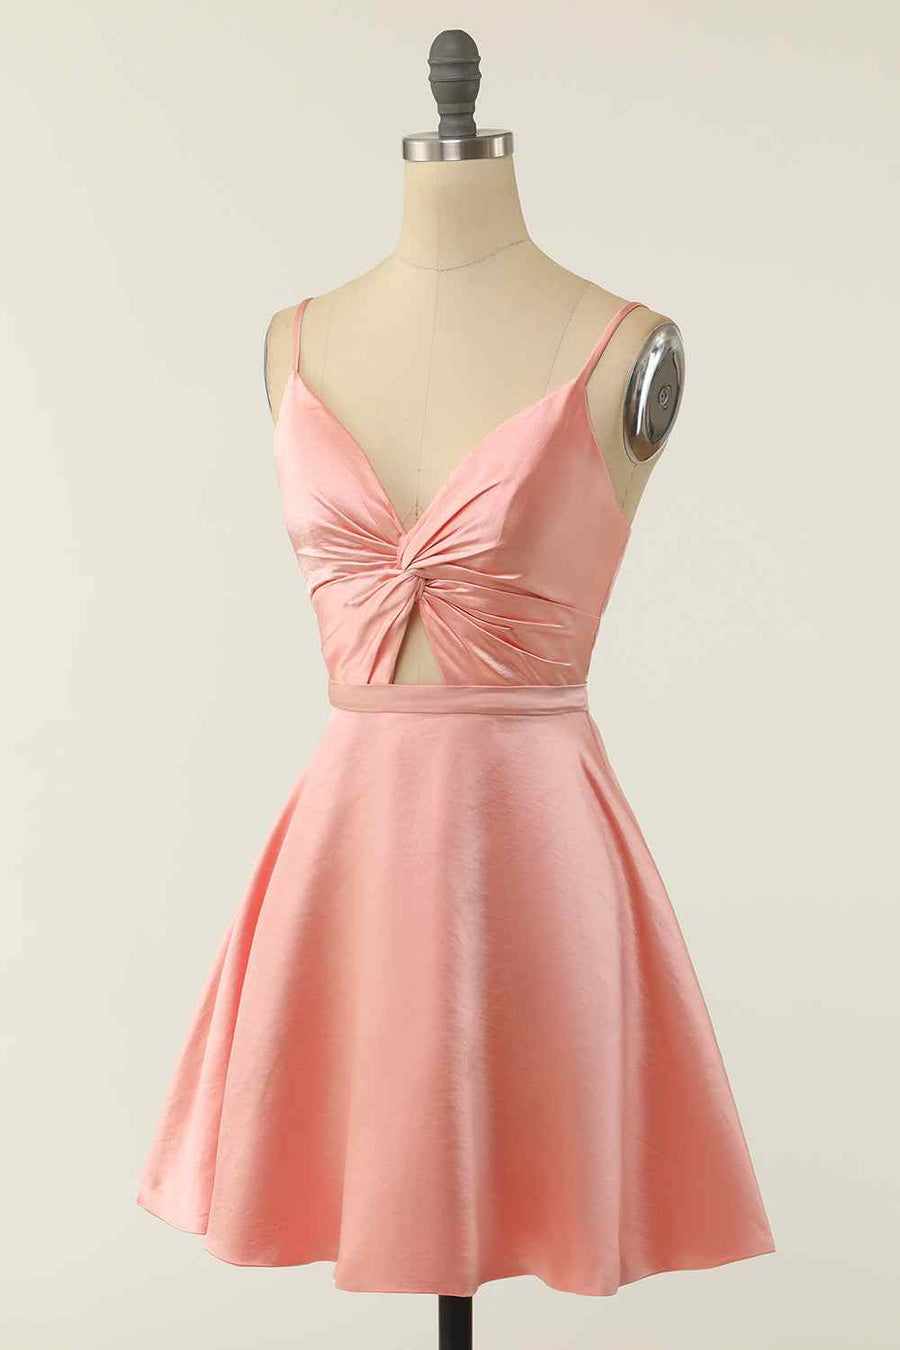 Pink A-line V Neck Twist Knot Cut-Out Pleated Mini Homecoming Dress